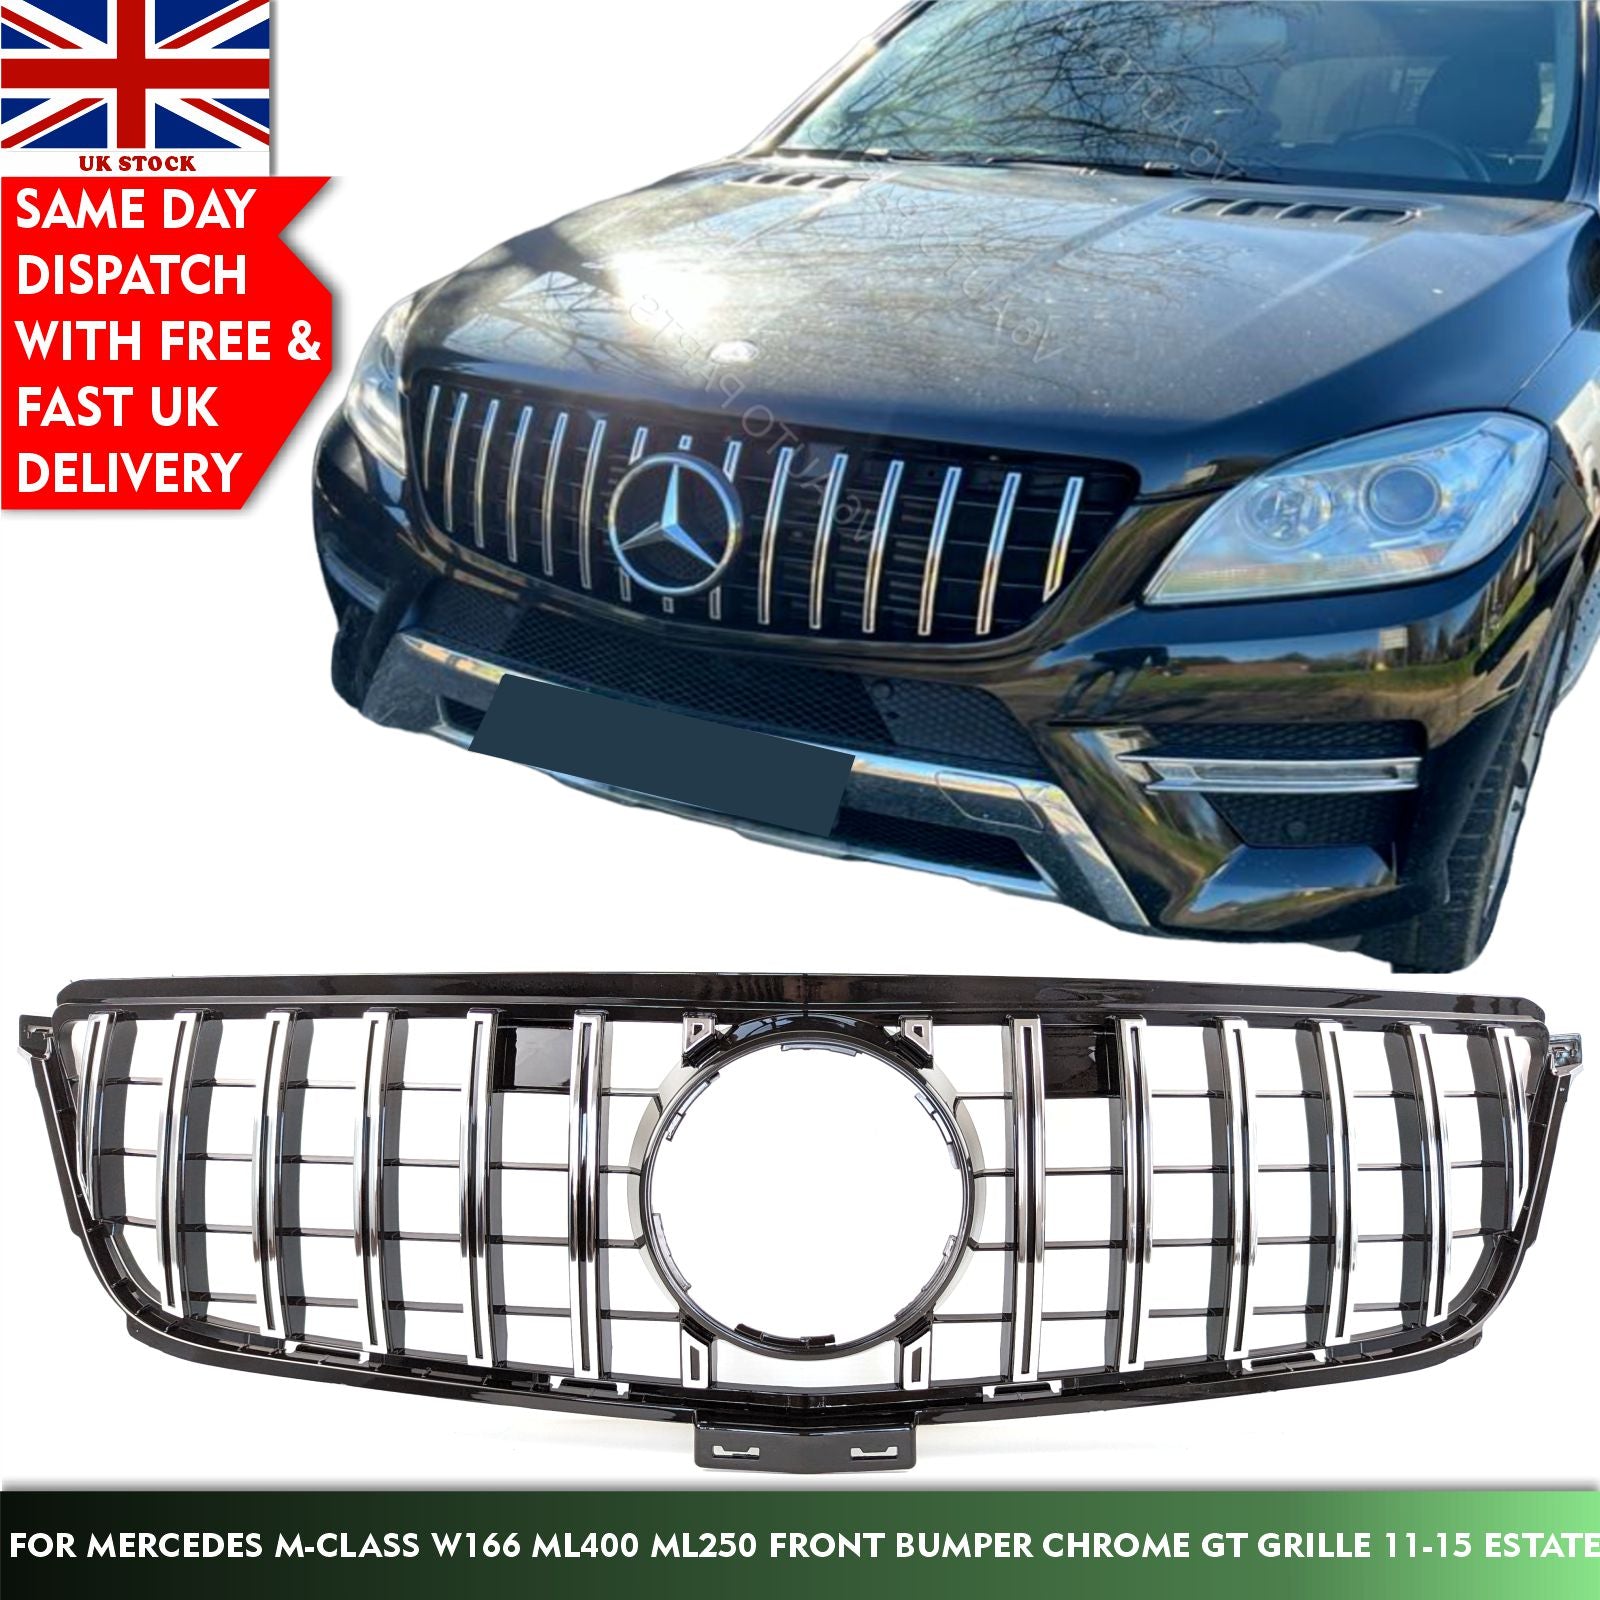 For Mercedes M-Class W166 ML250 ML320 Front Bumper Grille 11-15 Panamericana GTR